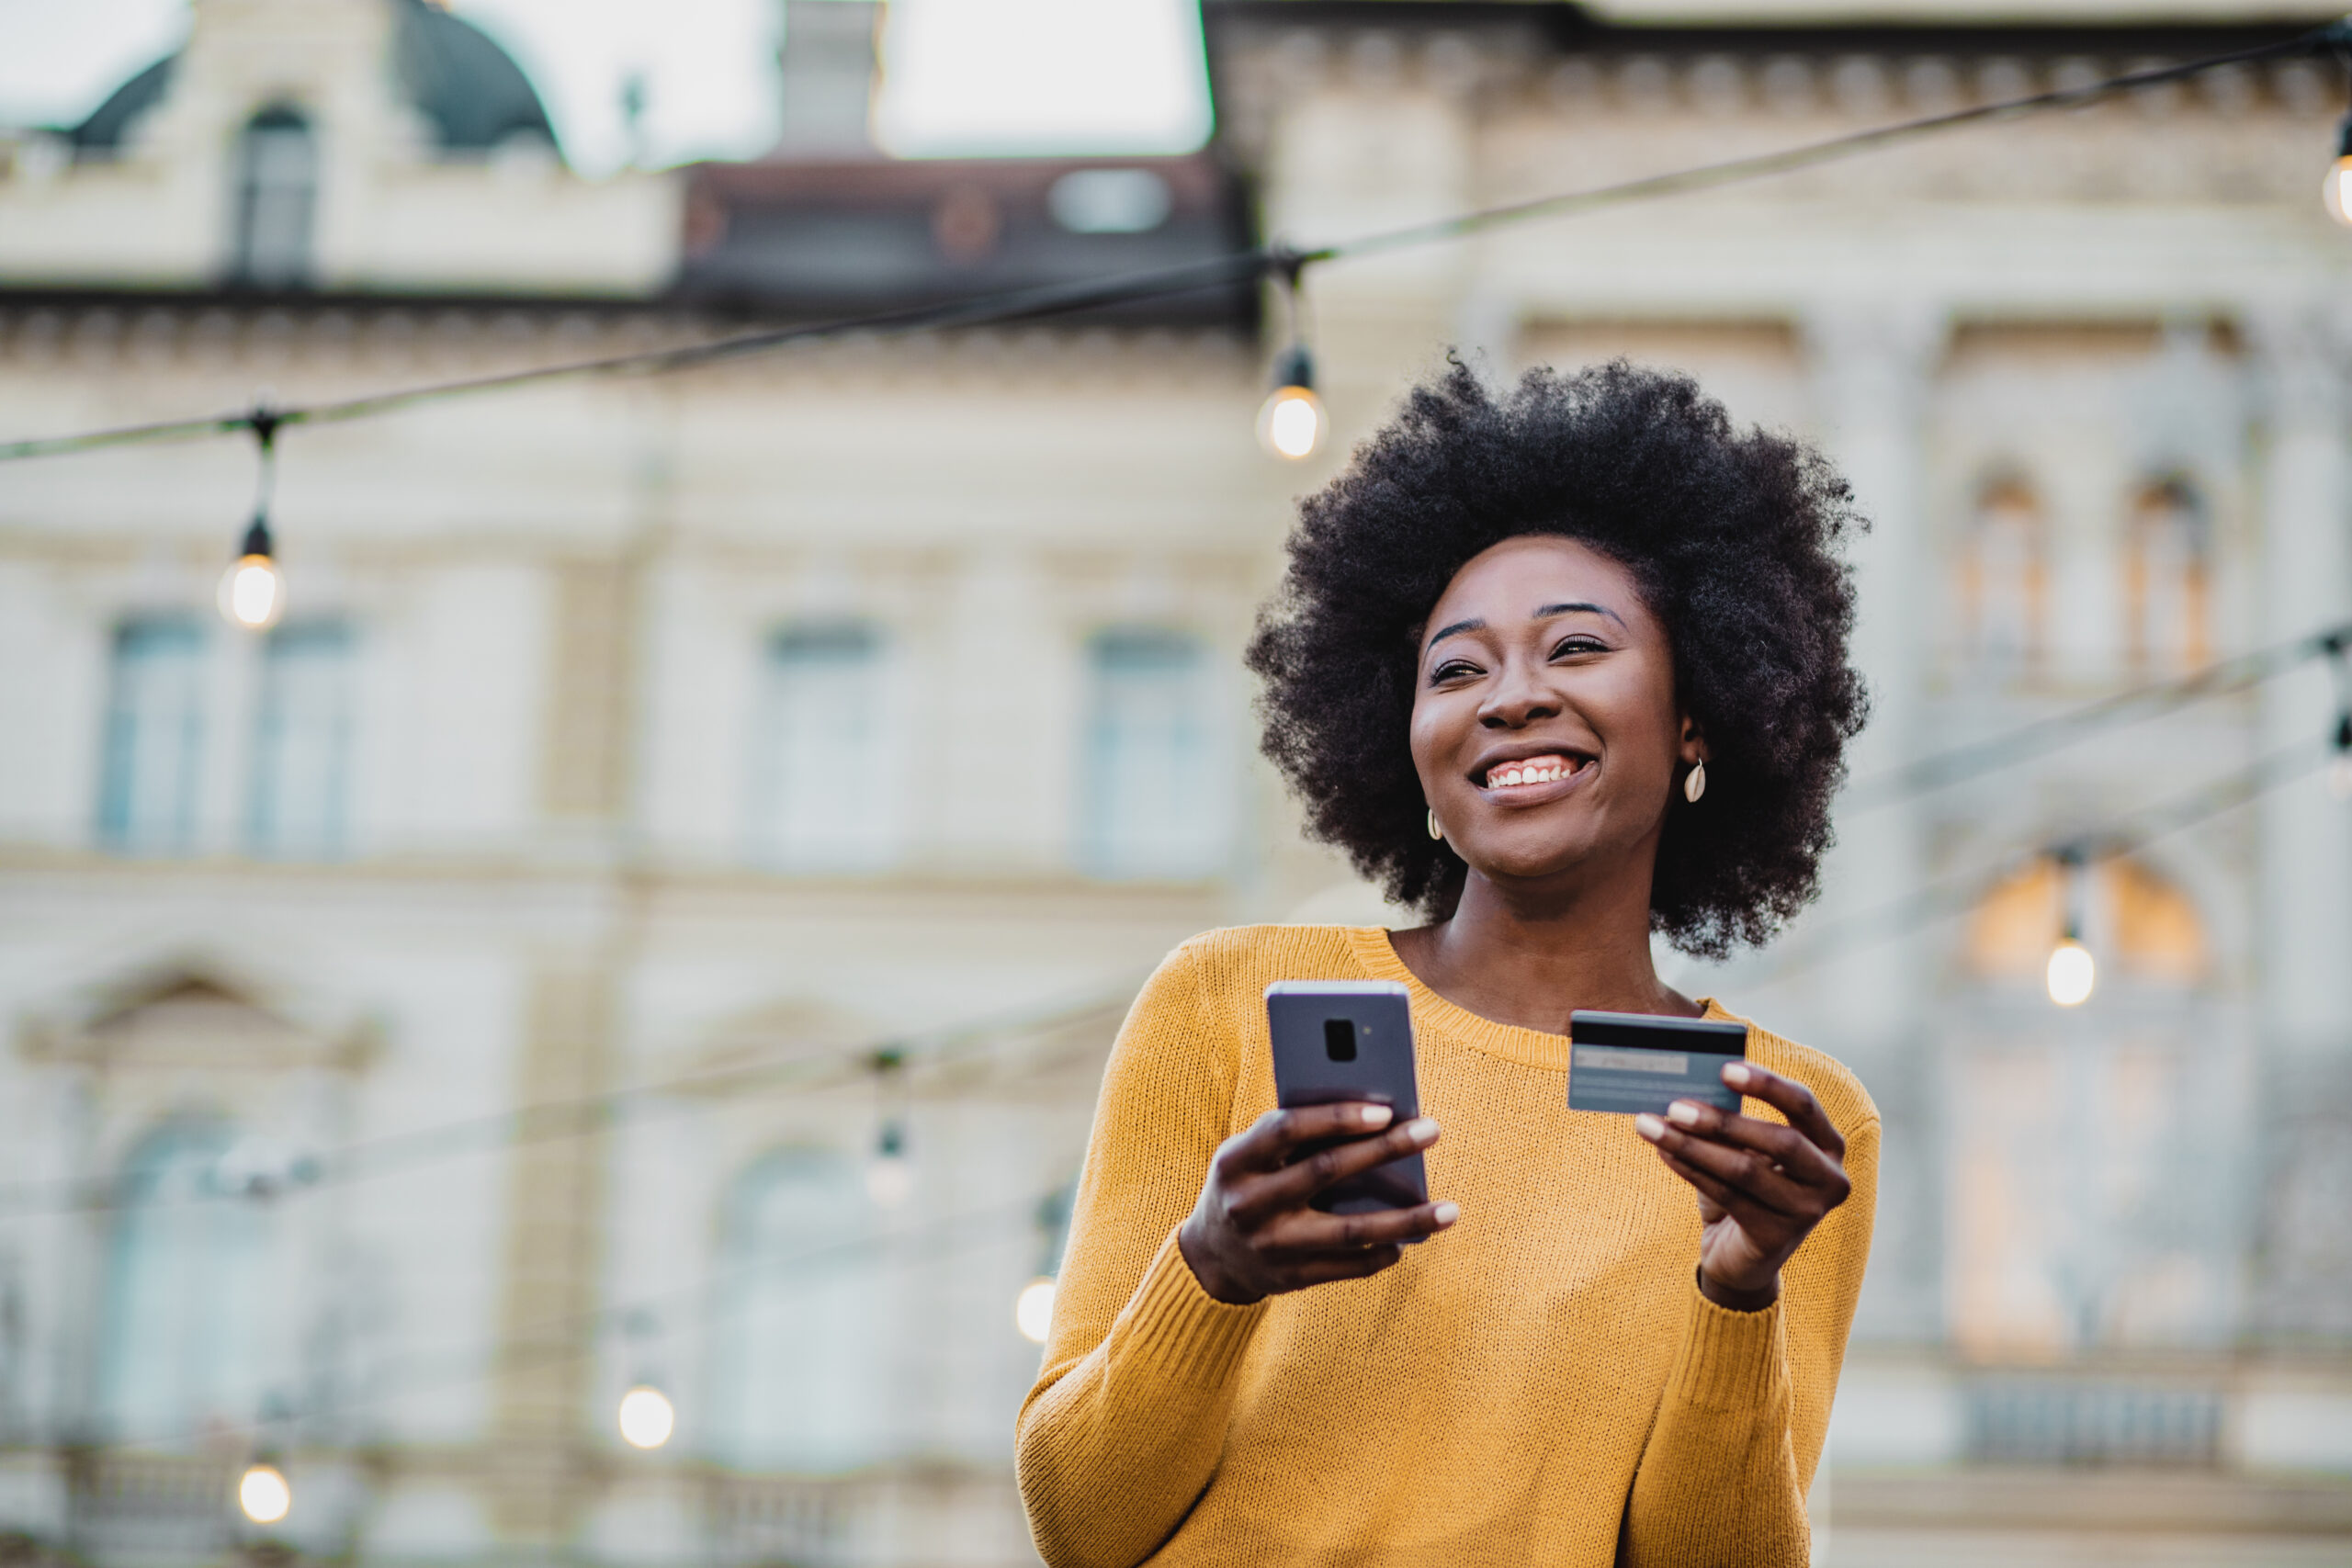 Happy woman walking holding a phone and credit card